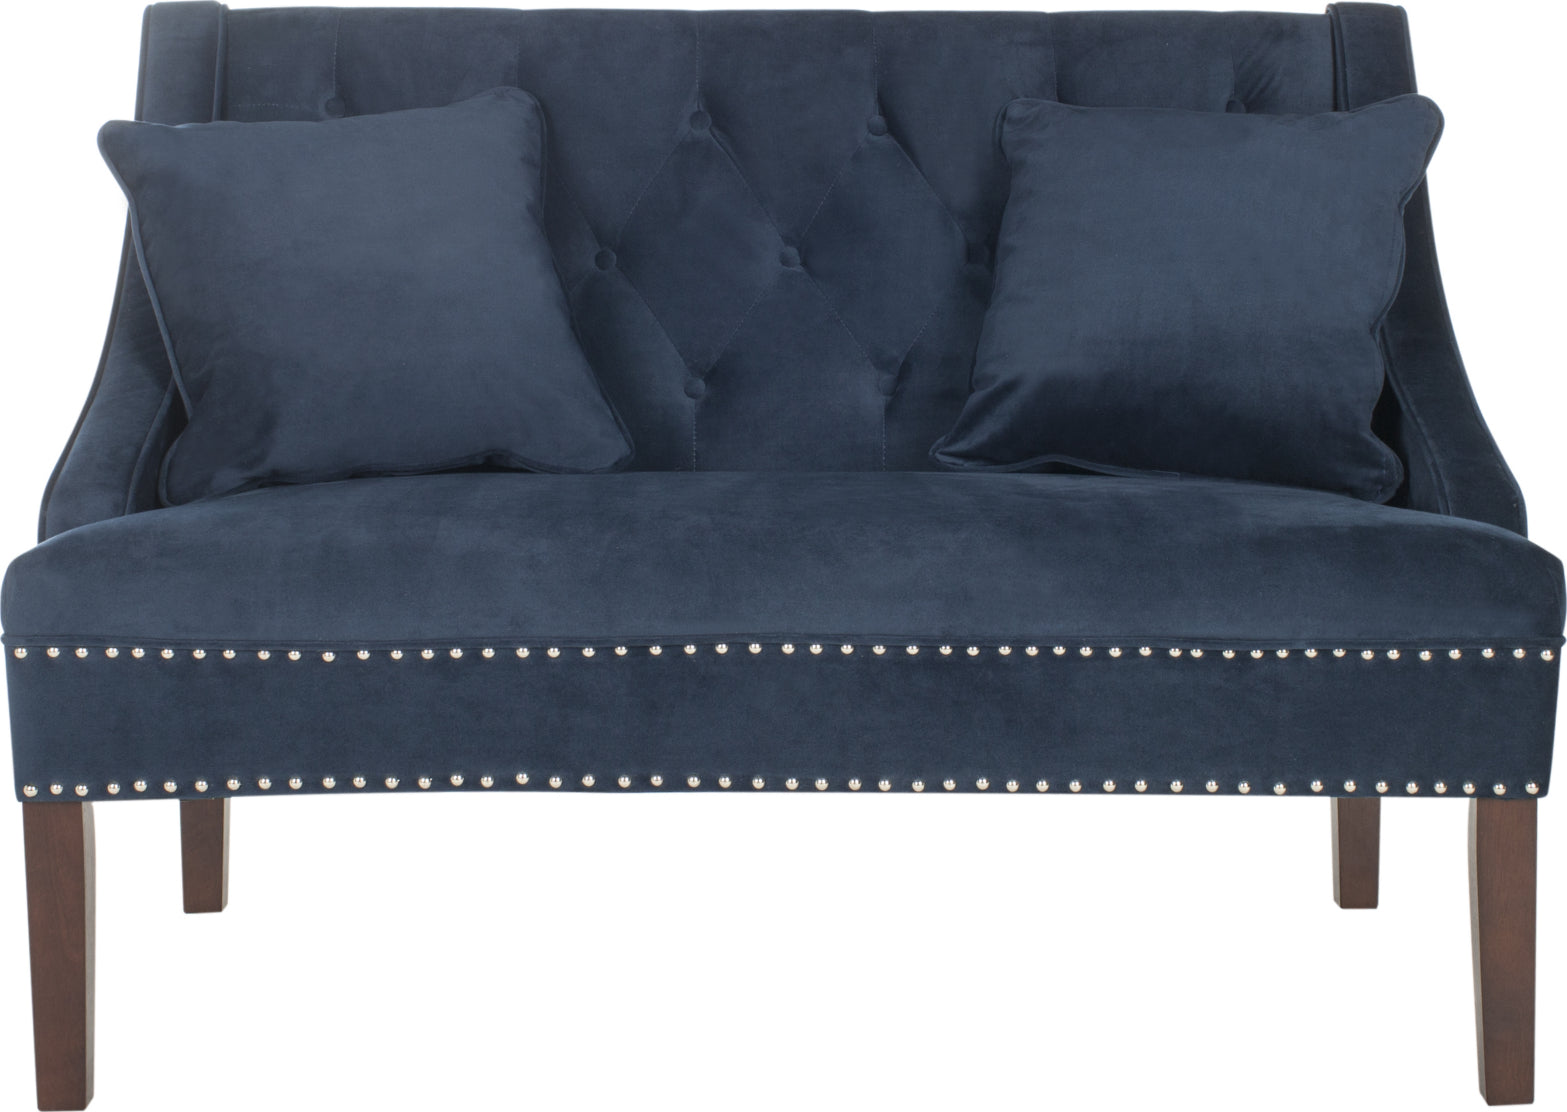 Safavieh Zoey Velvet Settee With Silver Nailheads Navy and Espresso Furniture main image